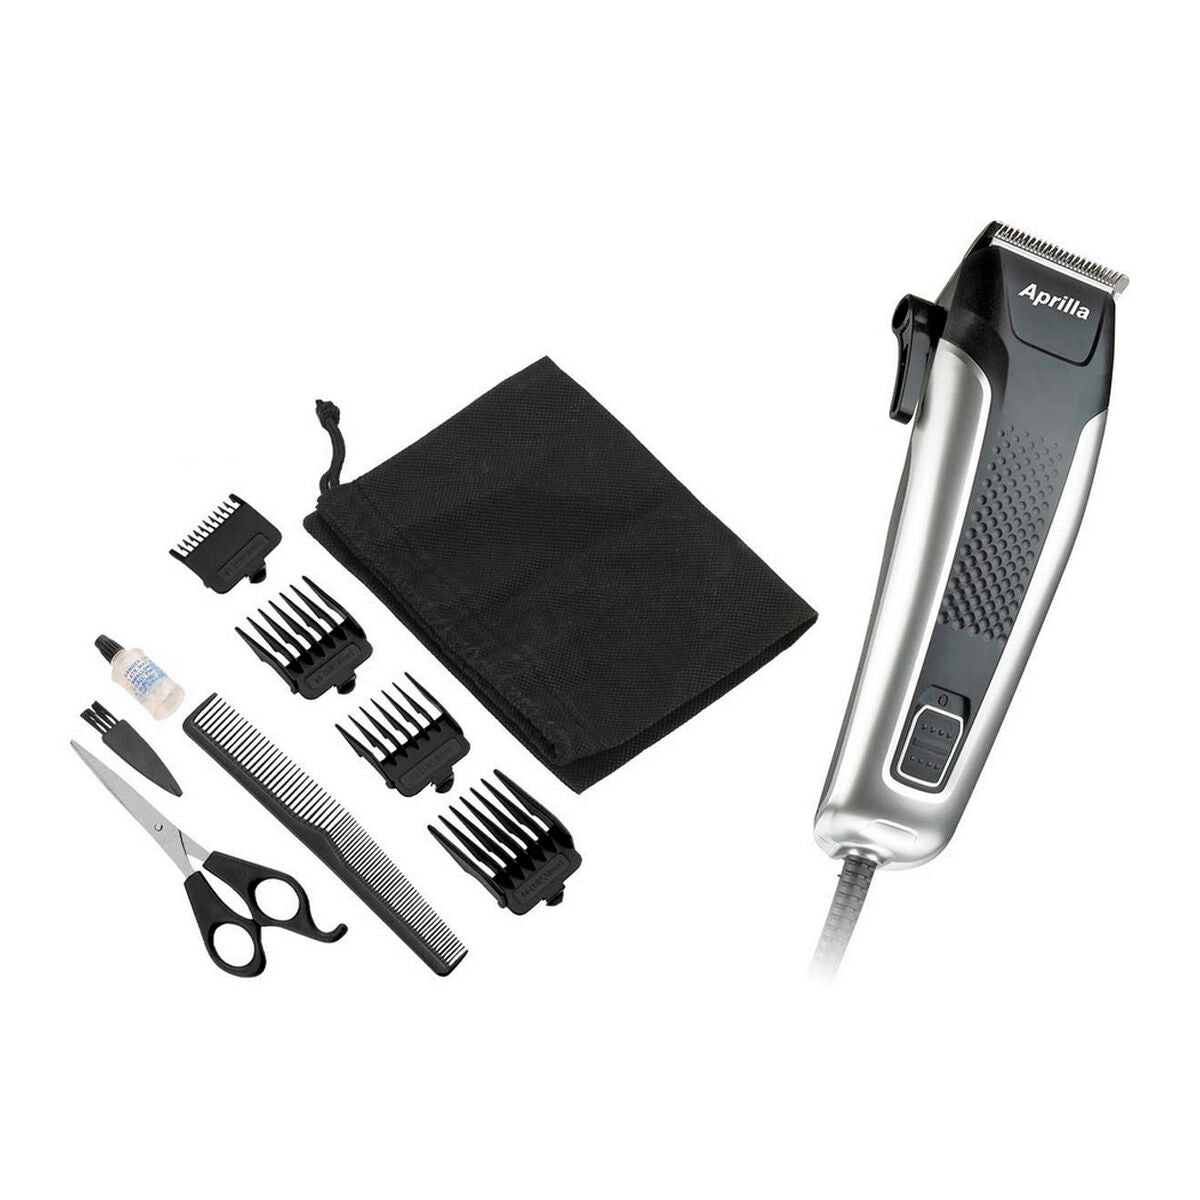 Hair clippers/Shaver Aprilla